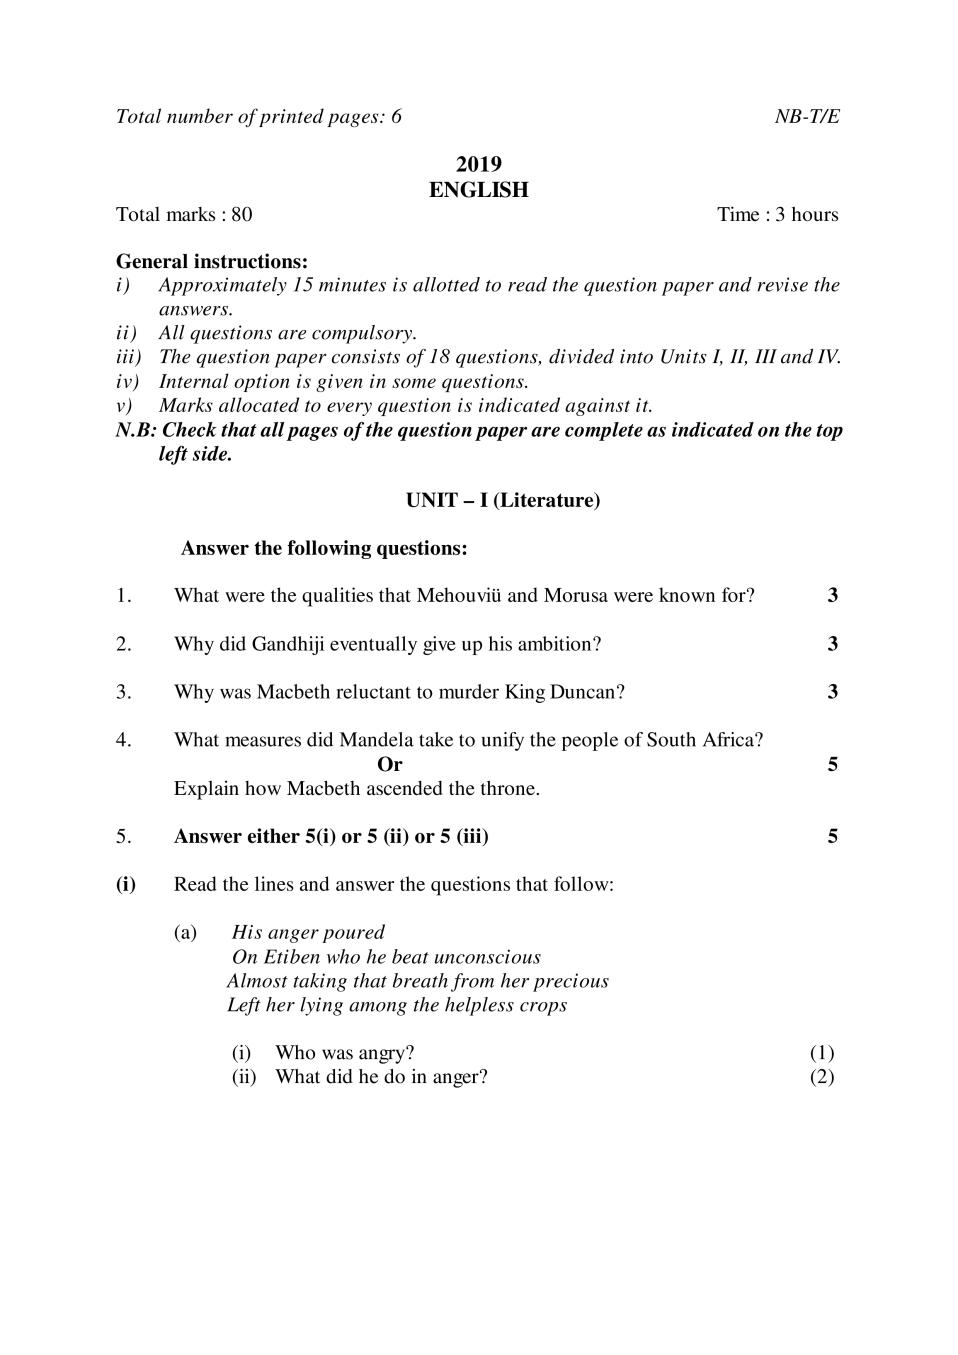 NBSE Class 10 Question Paper 2019 for English - Page 1